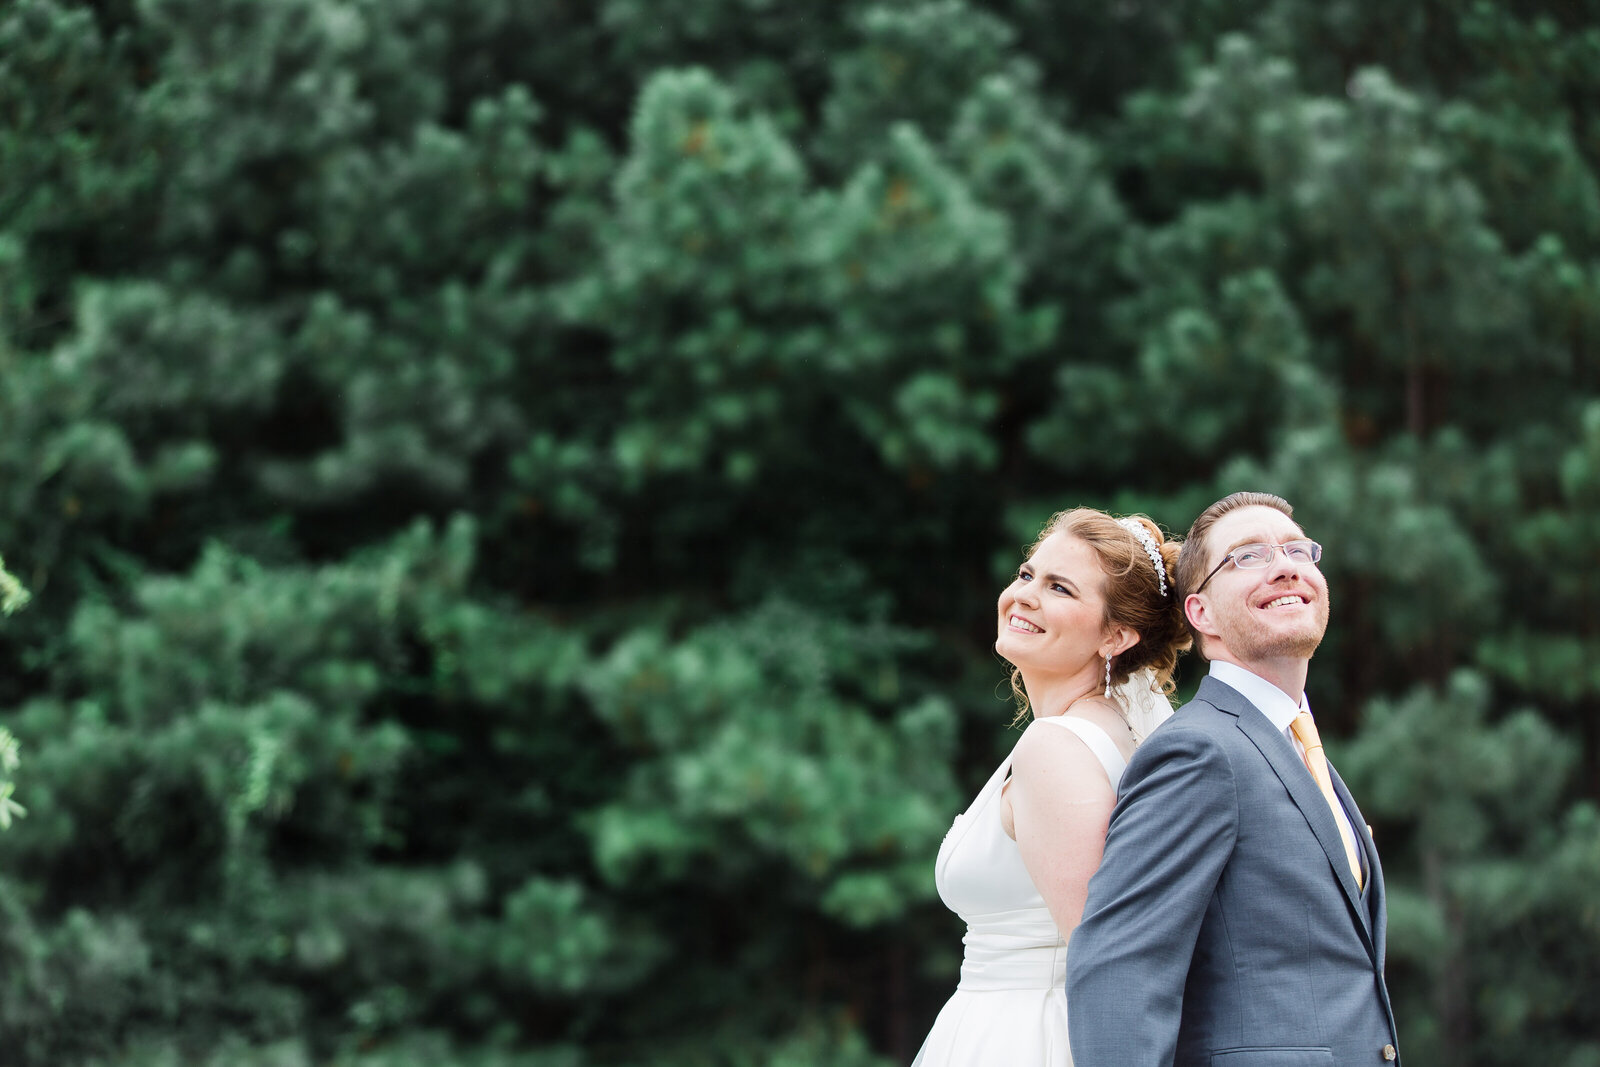 A bride and groom standing in front of a forest.